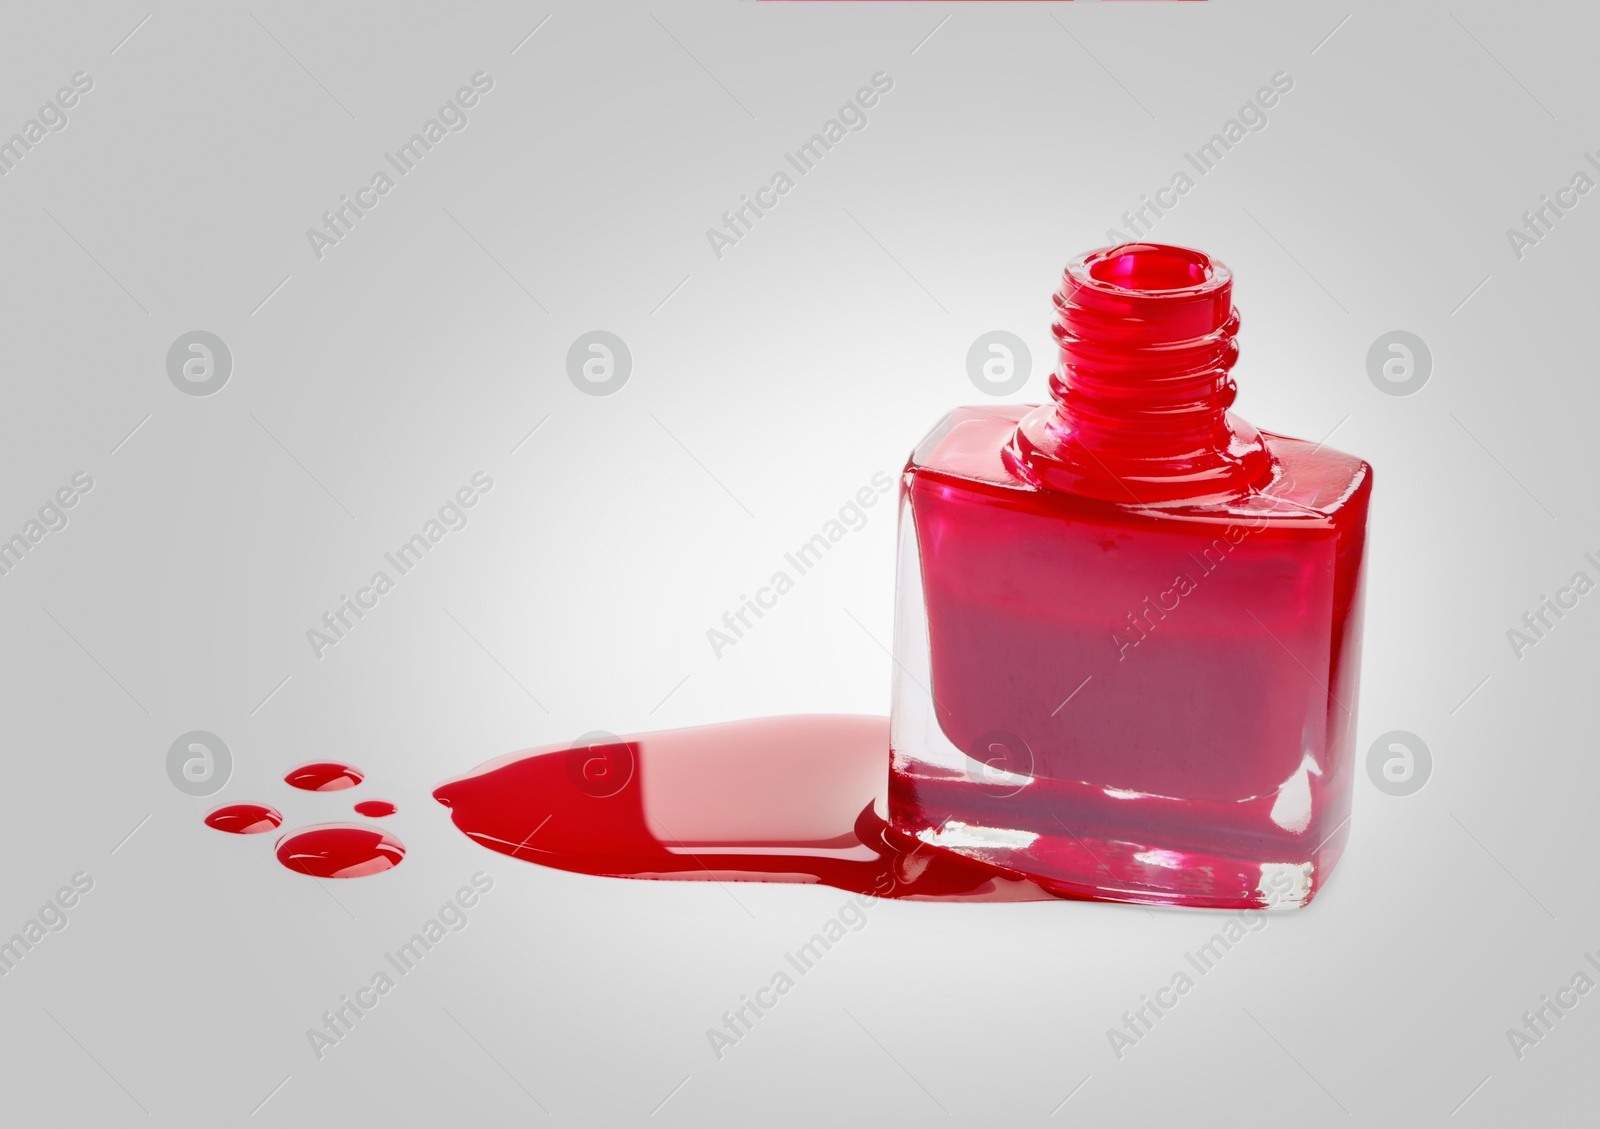 Image of Spilled red nail polish and bottle on light background. Space for text